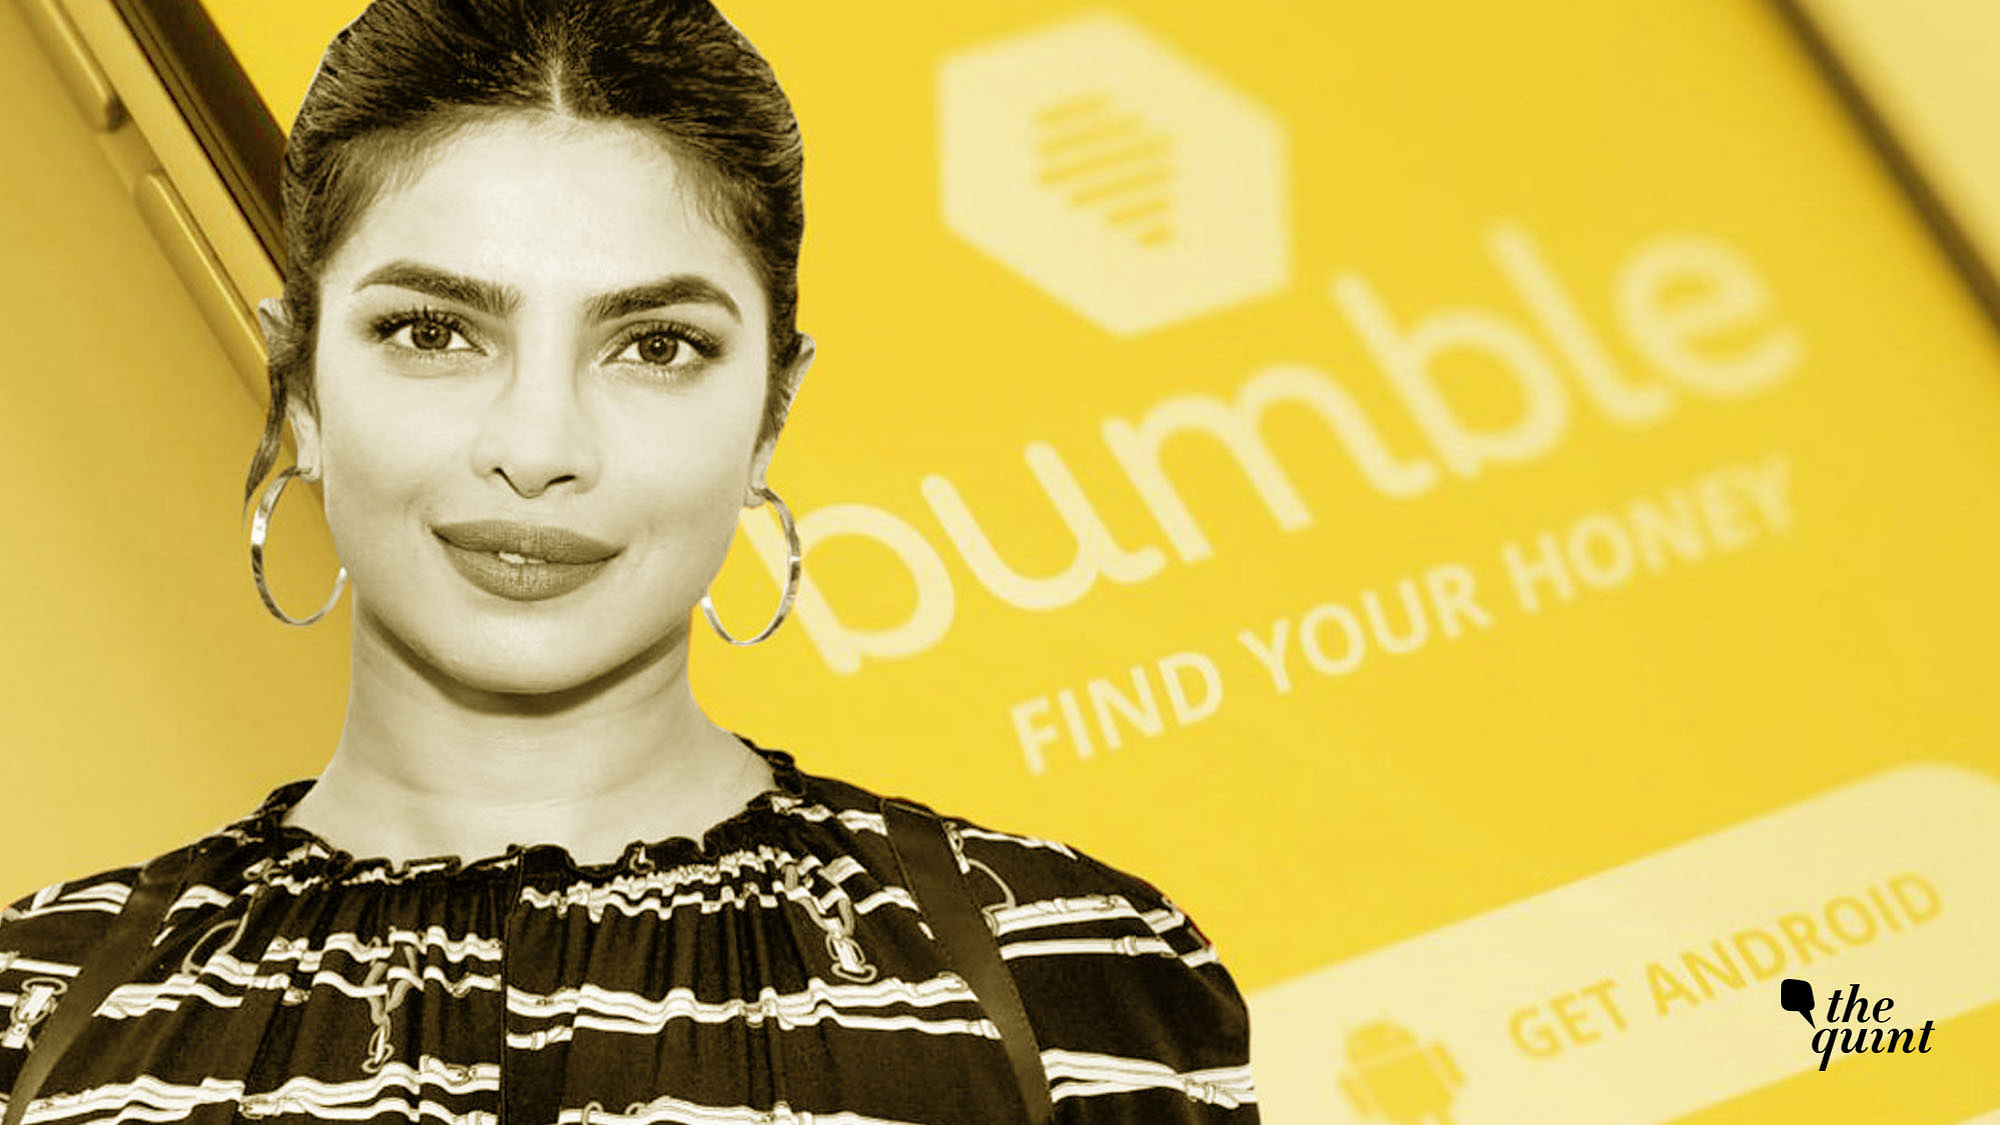 Bumble has recently debuted in India with a hard-hitting hashtag #EqualNotLoose.